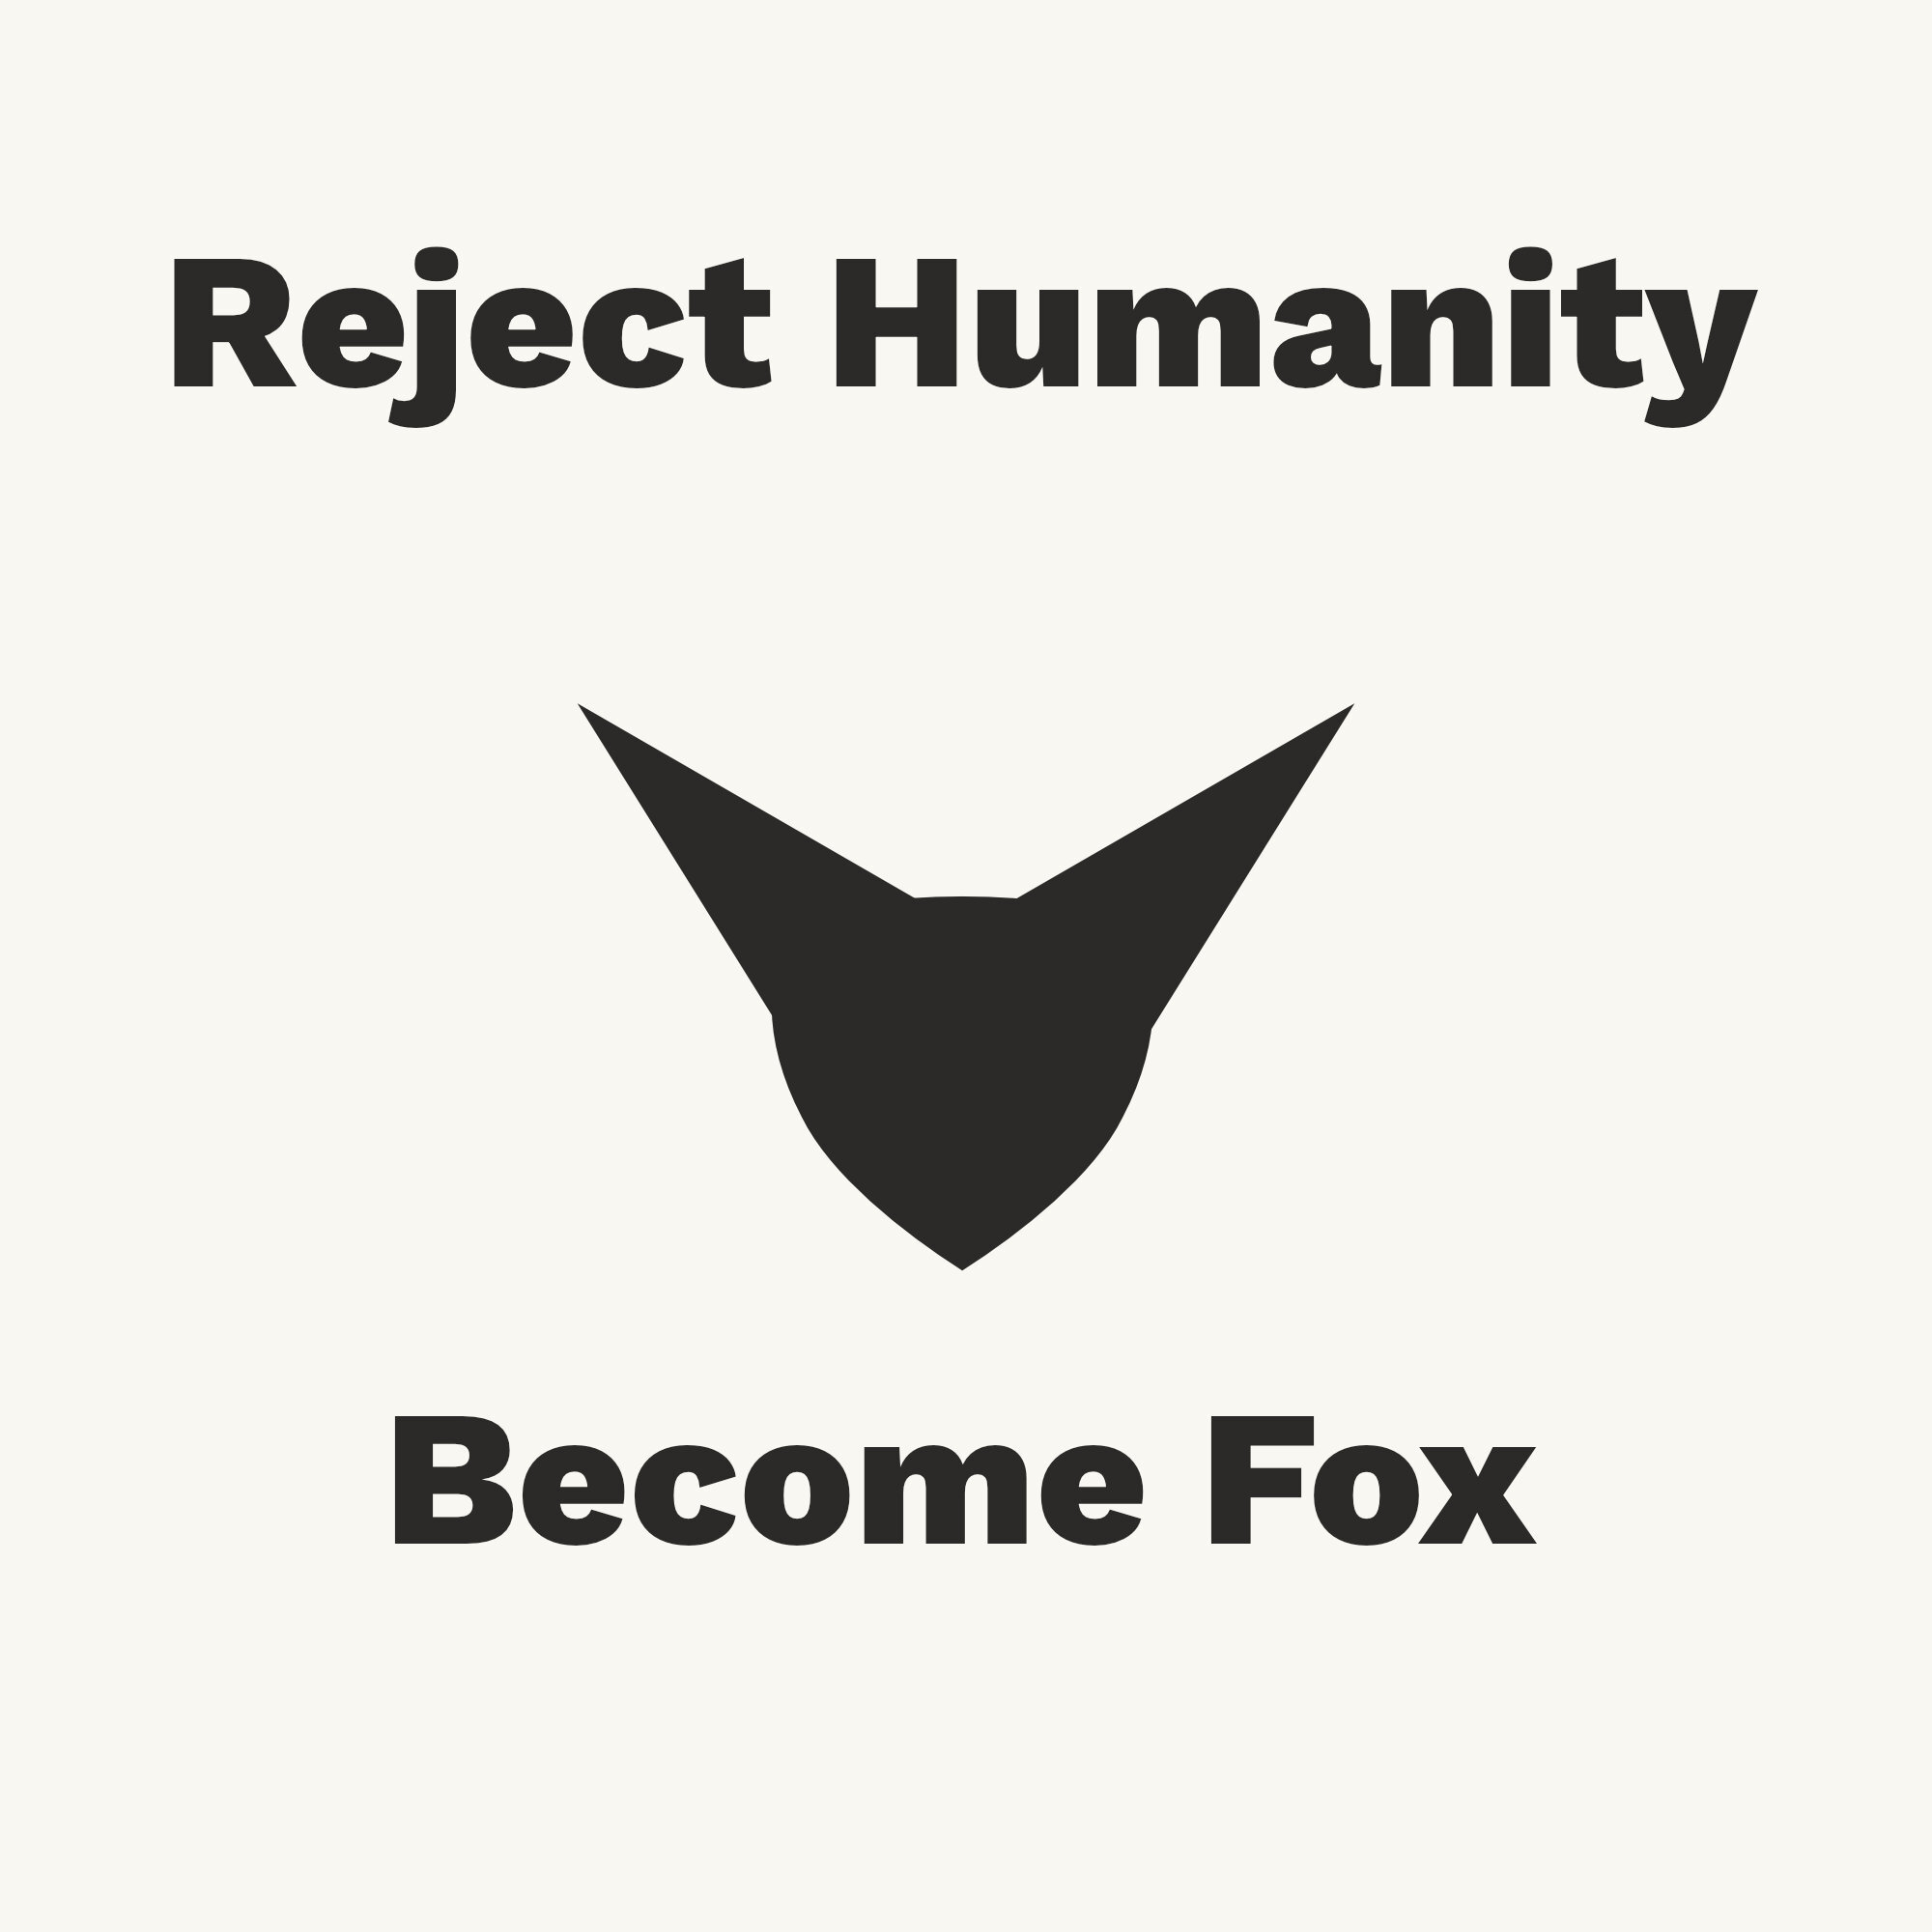 Reject Humanity, Become Fox